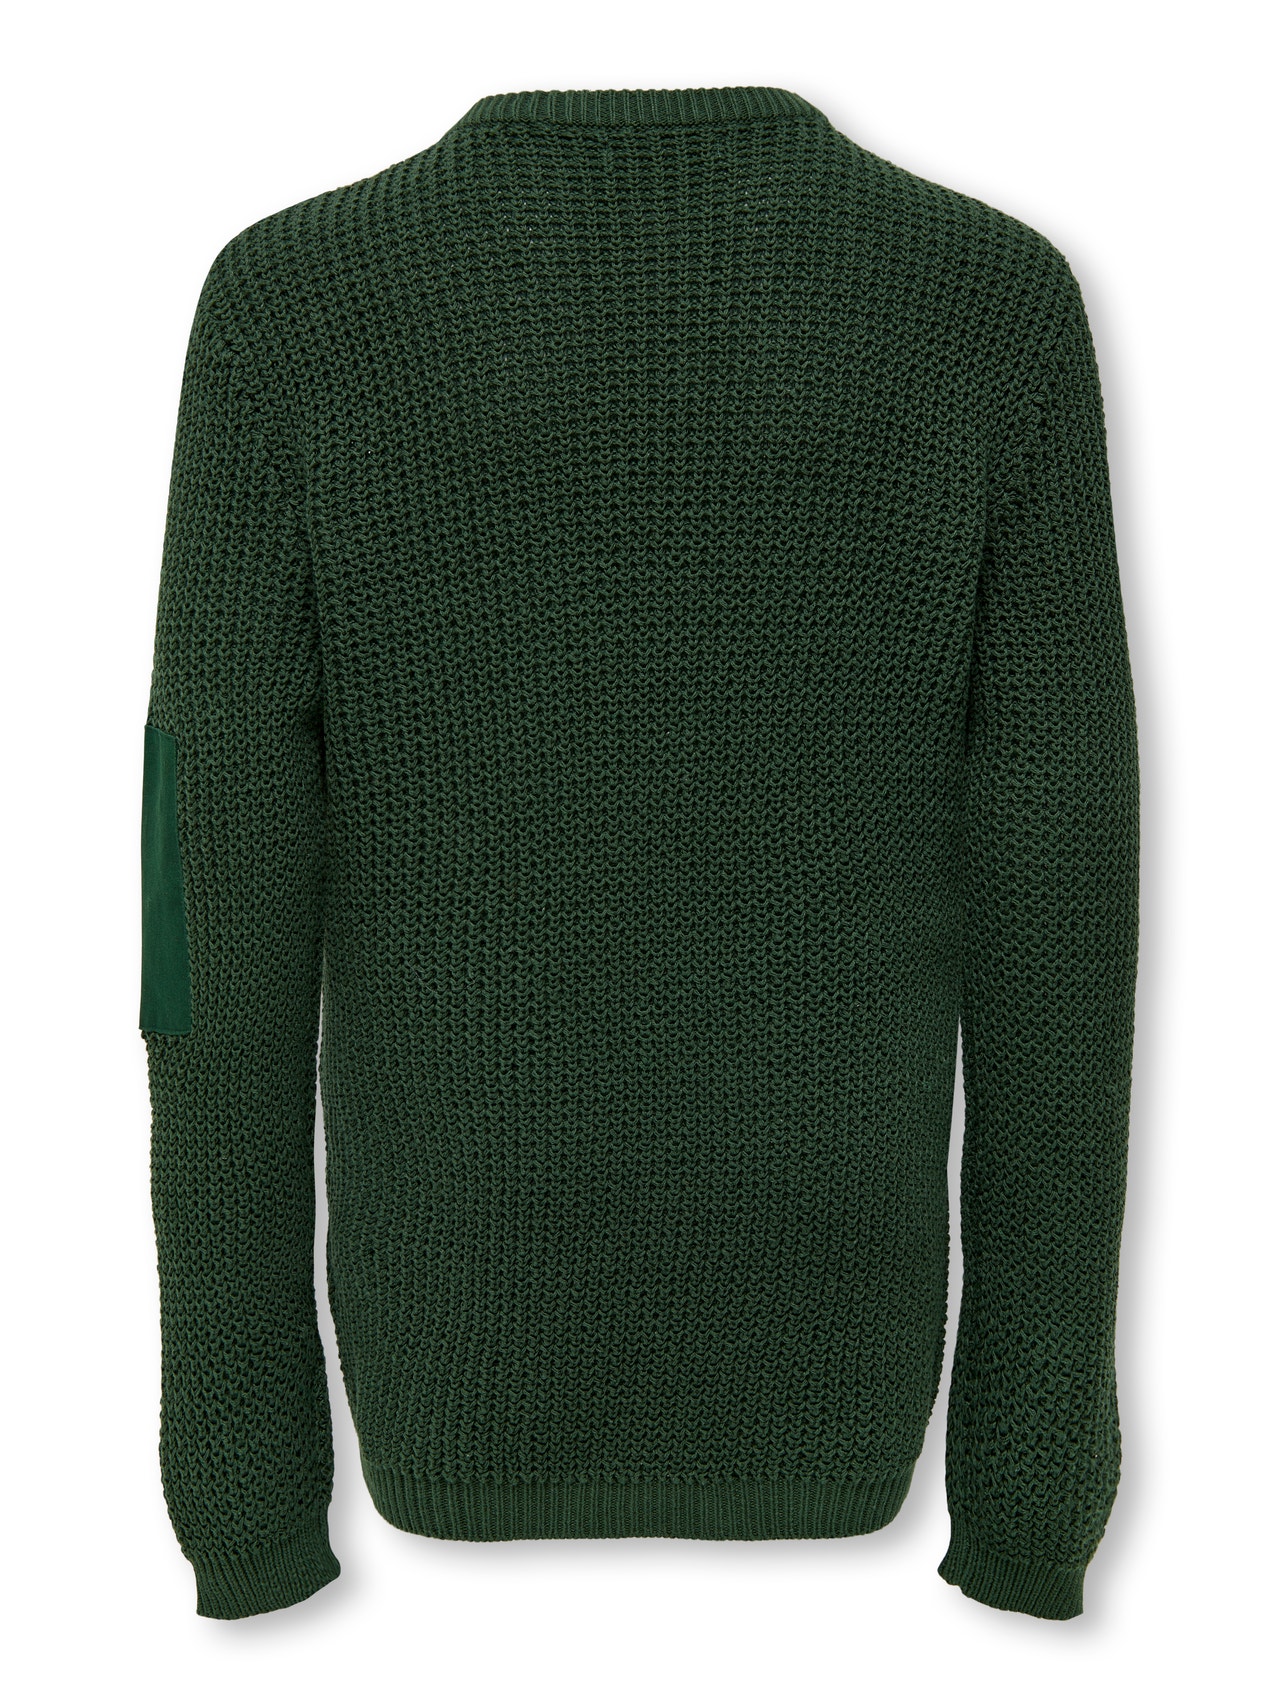 ONLY Pocket detailed knitted pullover -Mountain View - 15274007